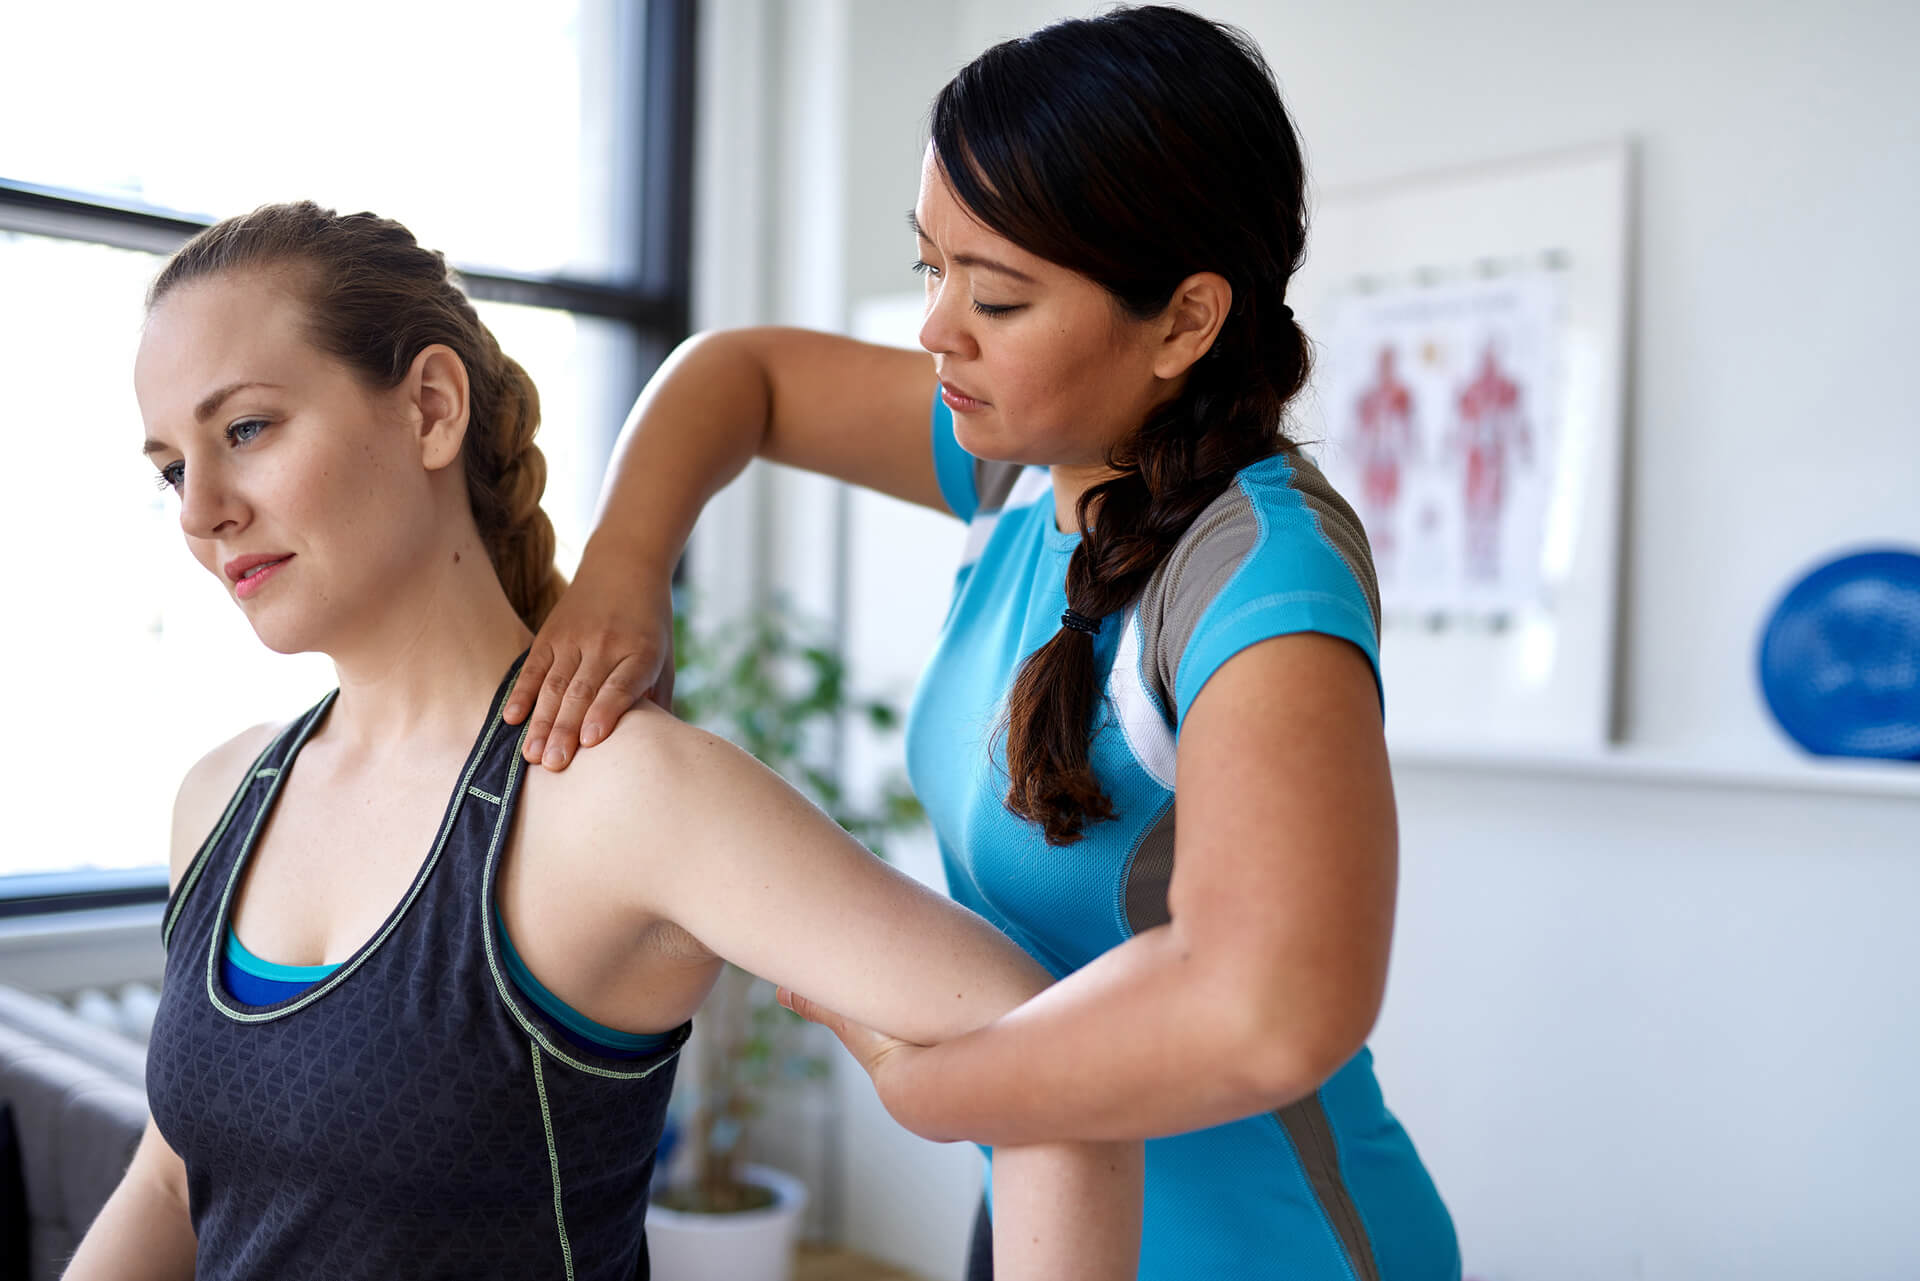 Physio massages patient's arm in a clinic